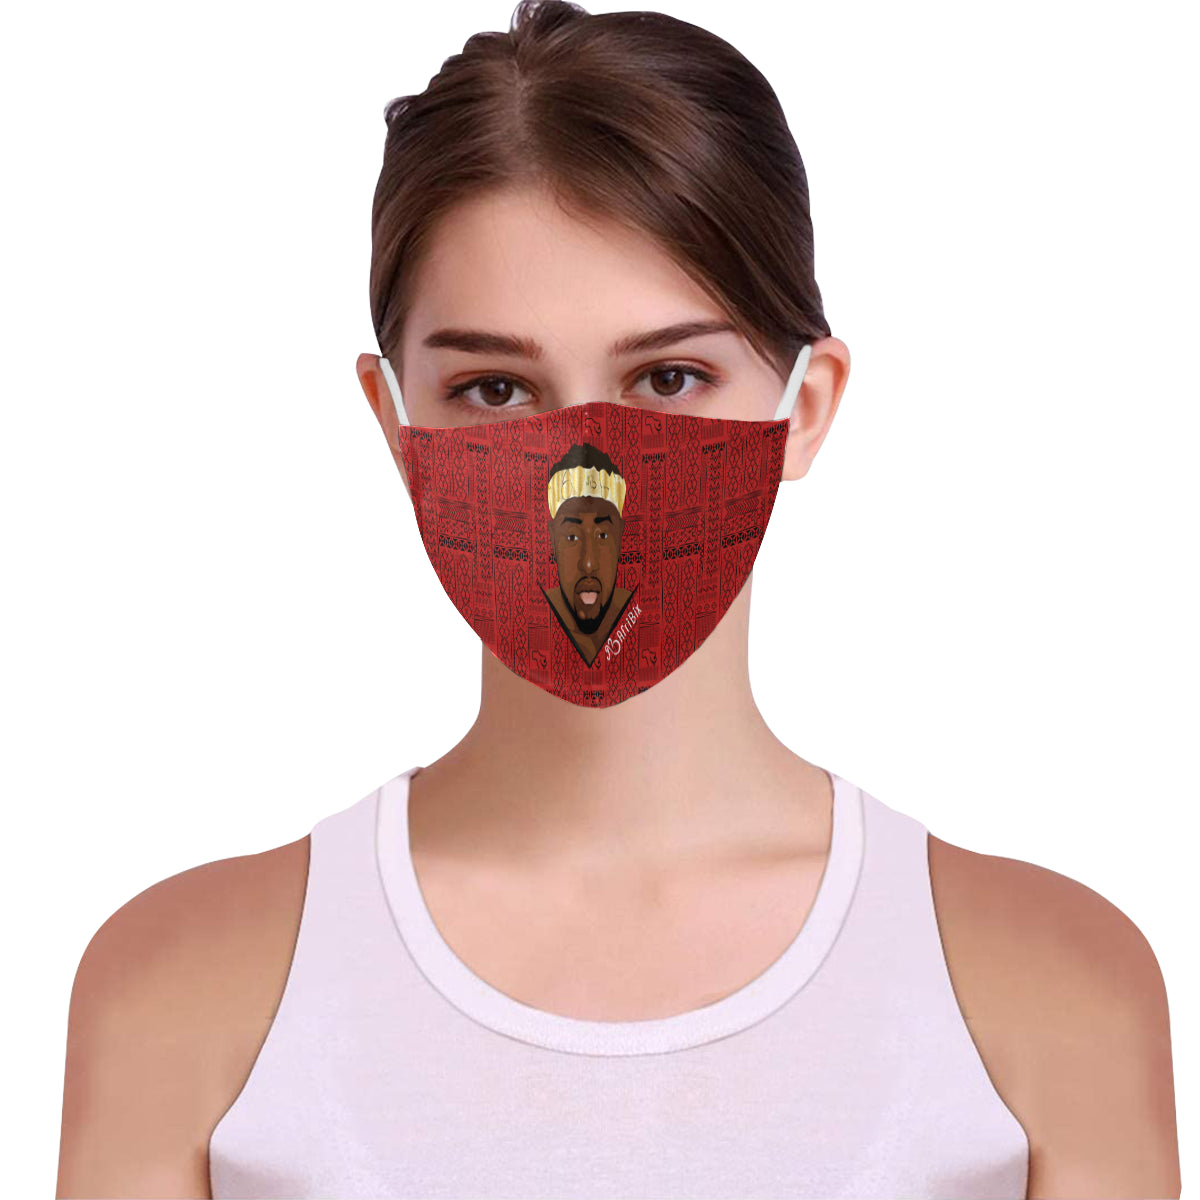 AfriBix Warrior King Cotton Fabric Face Mask with Filter Slot & Adjustable Strap (Pack of 5) - Non-medical use